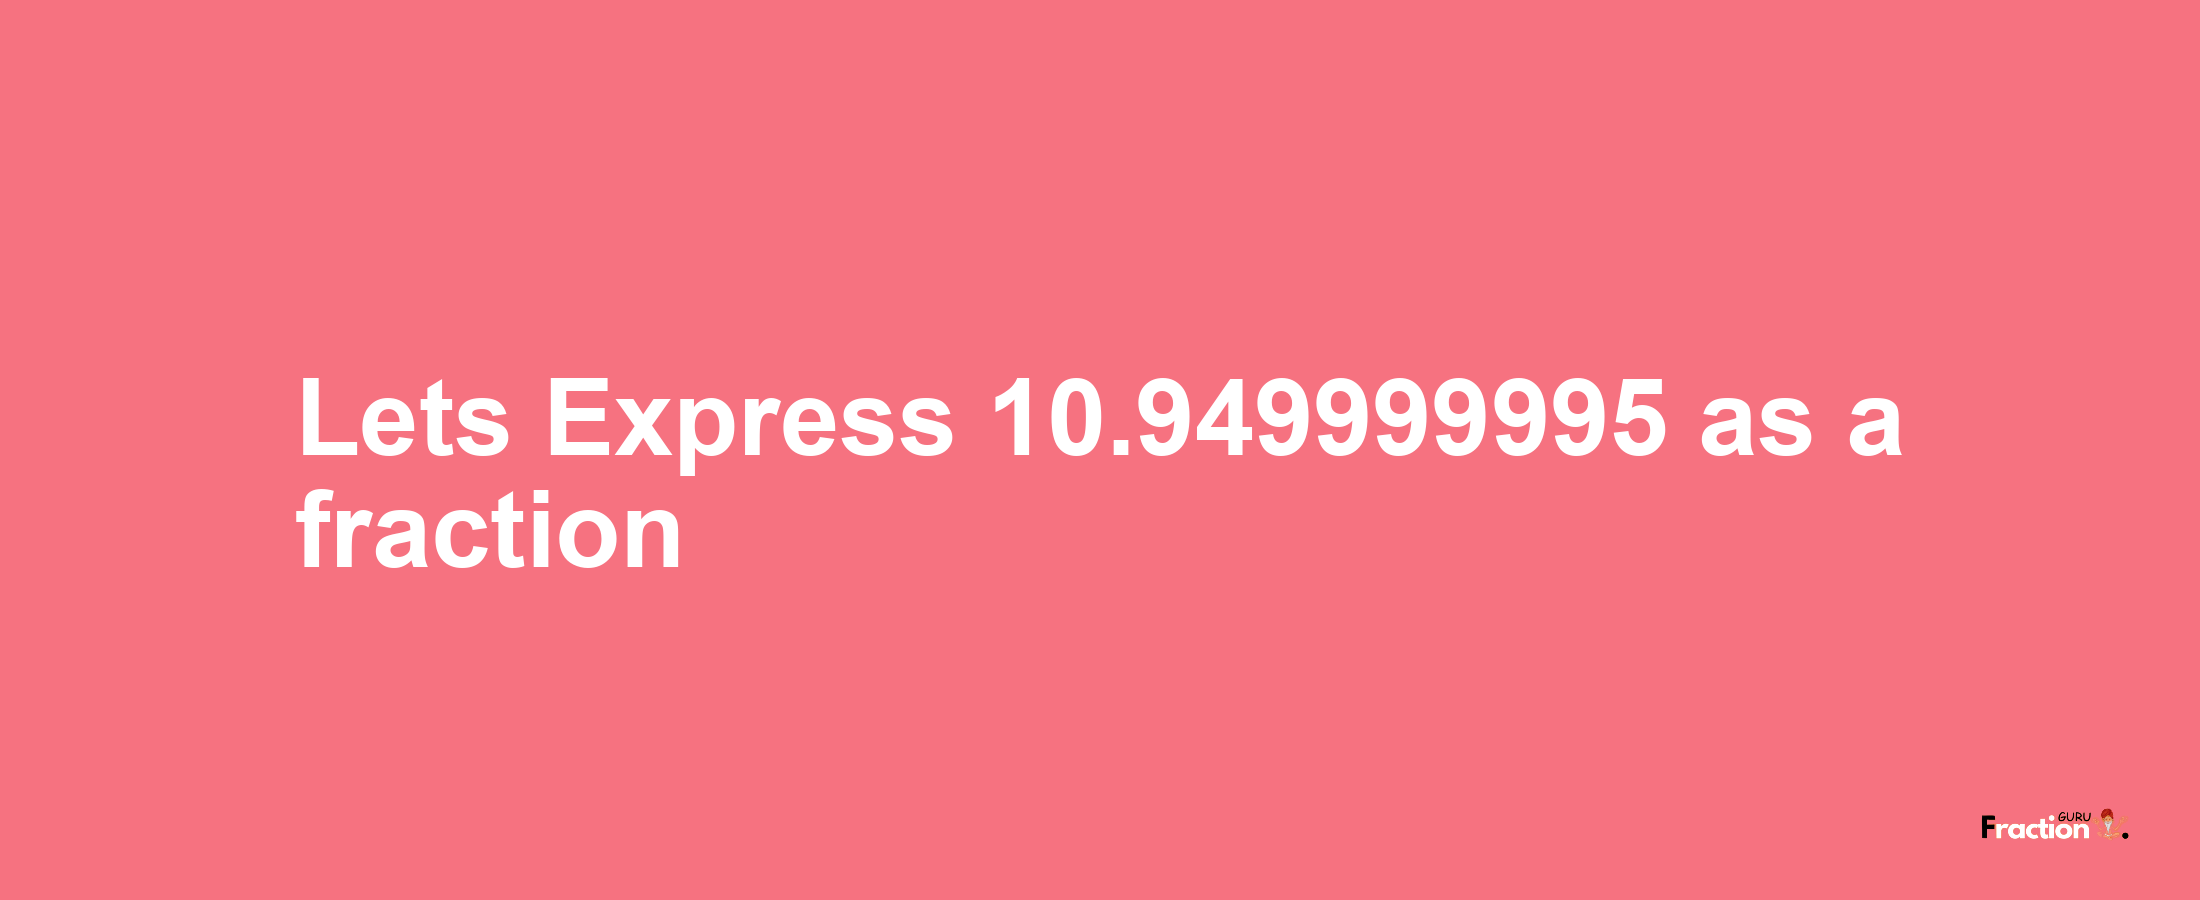 Lets Express 10.949999995 as afraction